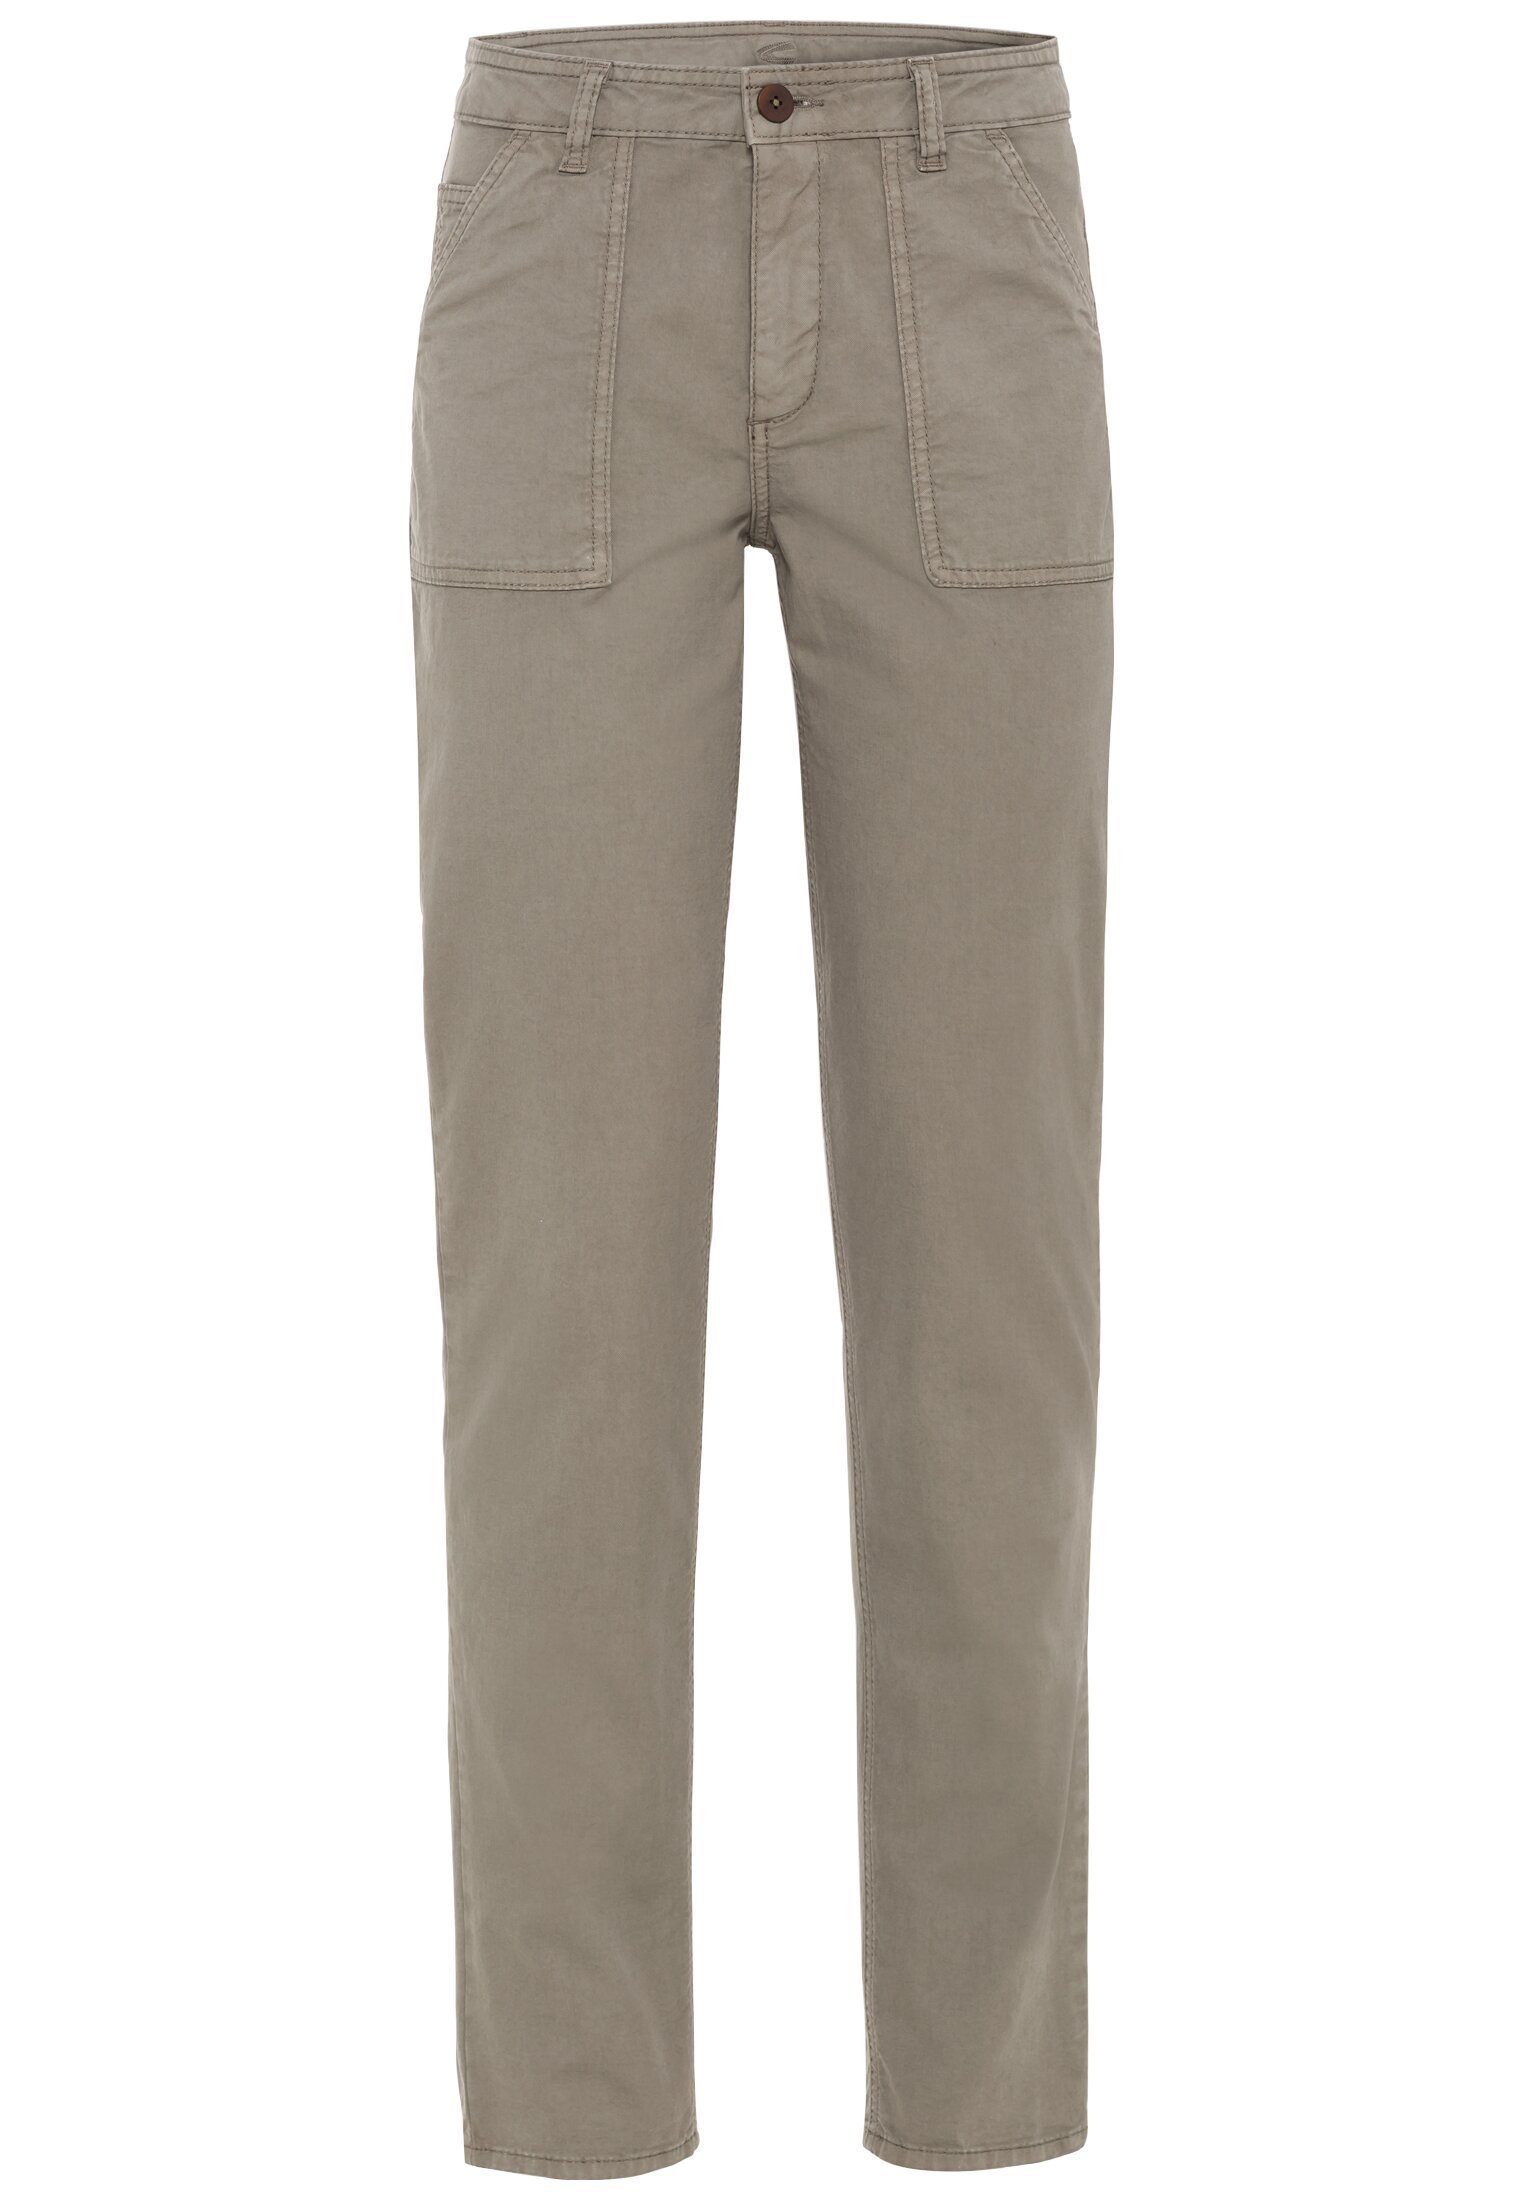 camel active Chinohose Camel Active Damen Worker Chino in Straight Fit un